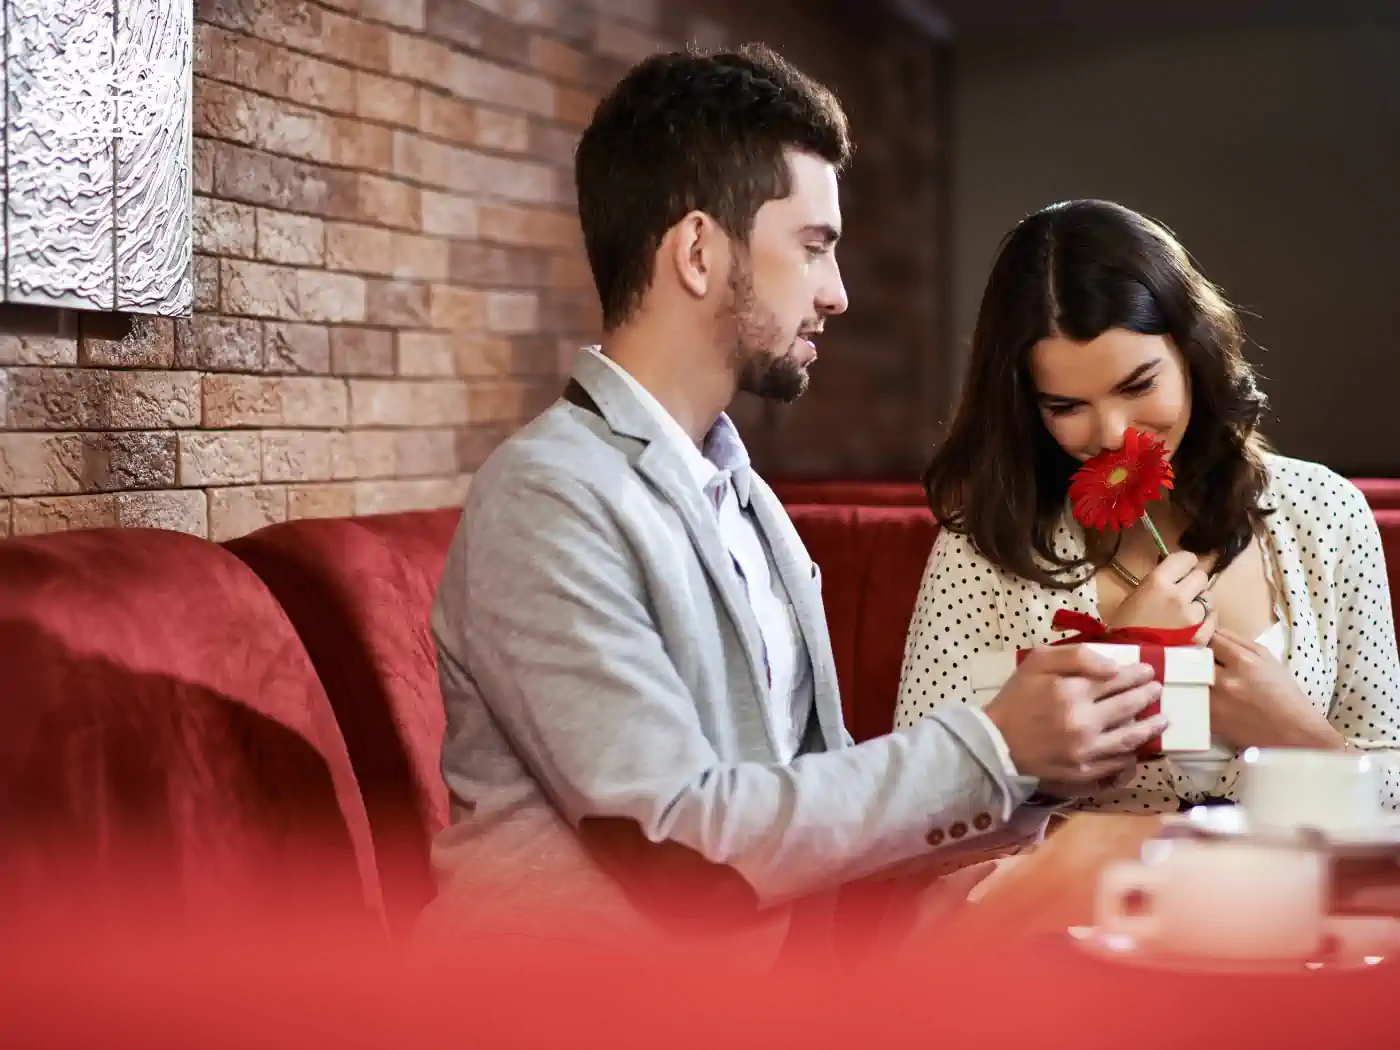 A couple sharing a special moment with a gift in a cosy setting, representing the warmth of gifting through Nationwide Gift Delivery. Fabulous Flowers and Gifts - Nationwide Gift Delivery.